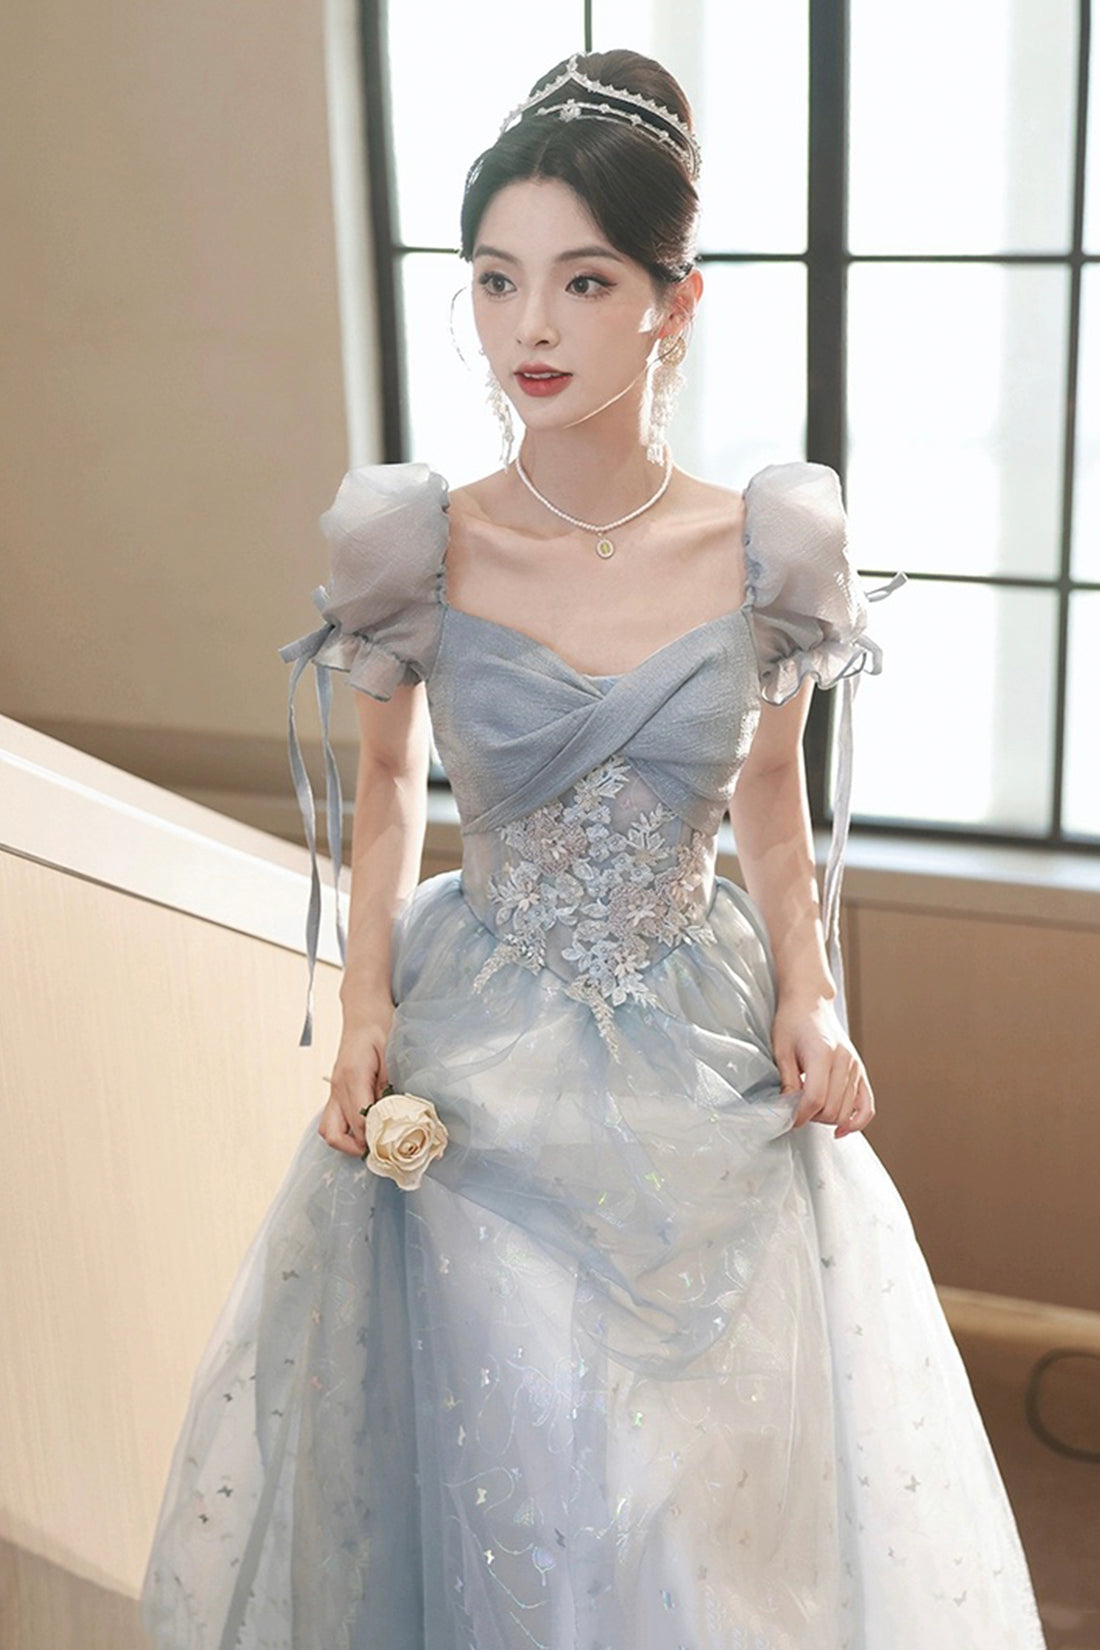 Beautiful Tulle Short Sleeves Formal Dress with Lace, Lovely Blue Long  Prom Dress